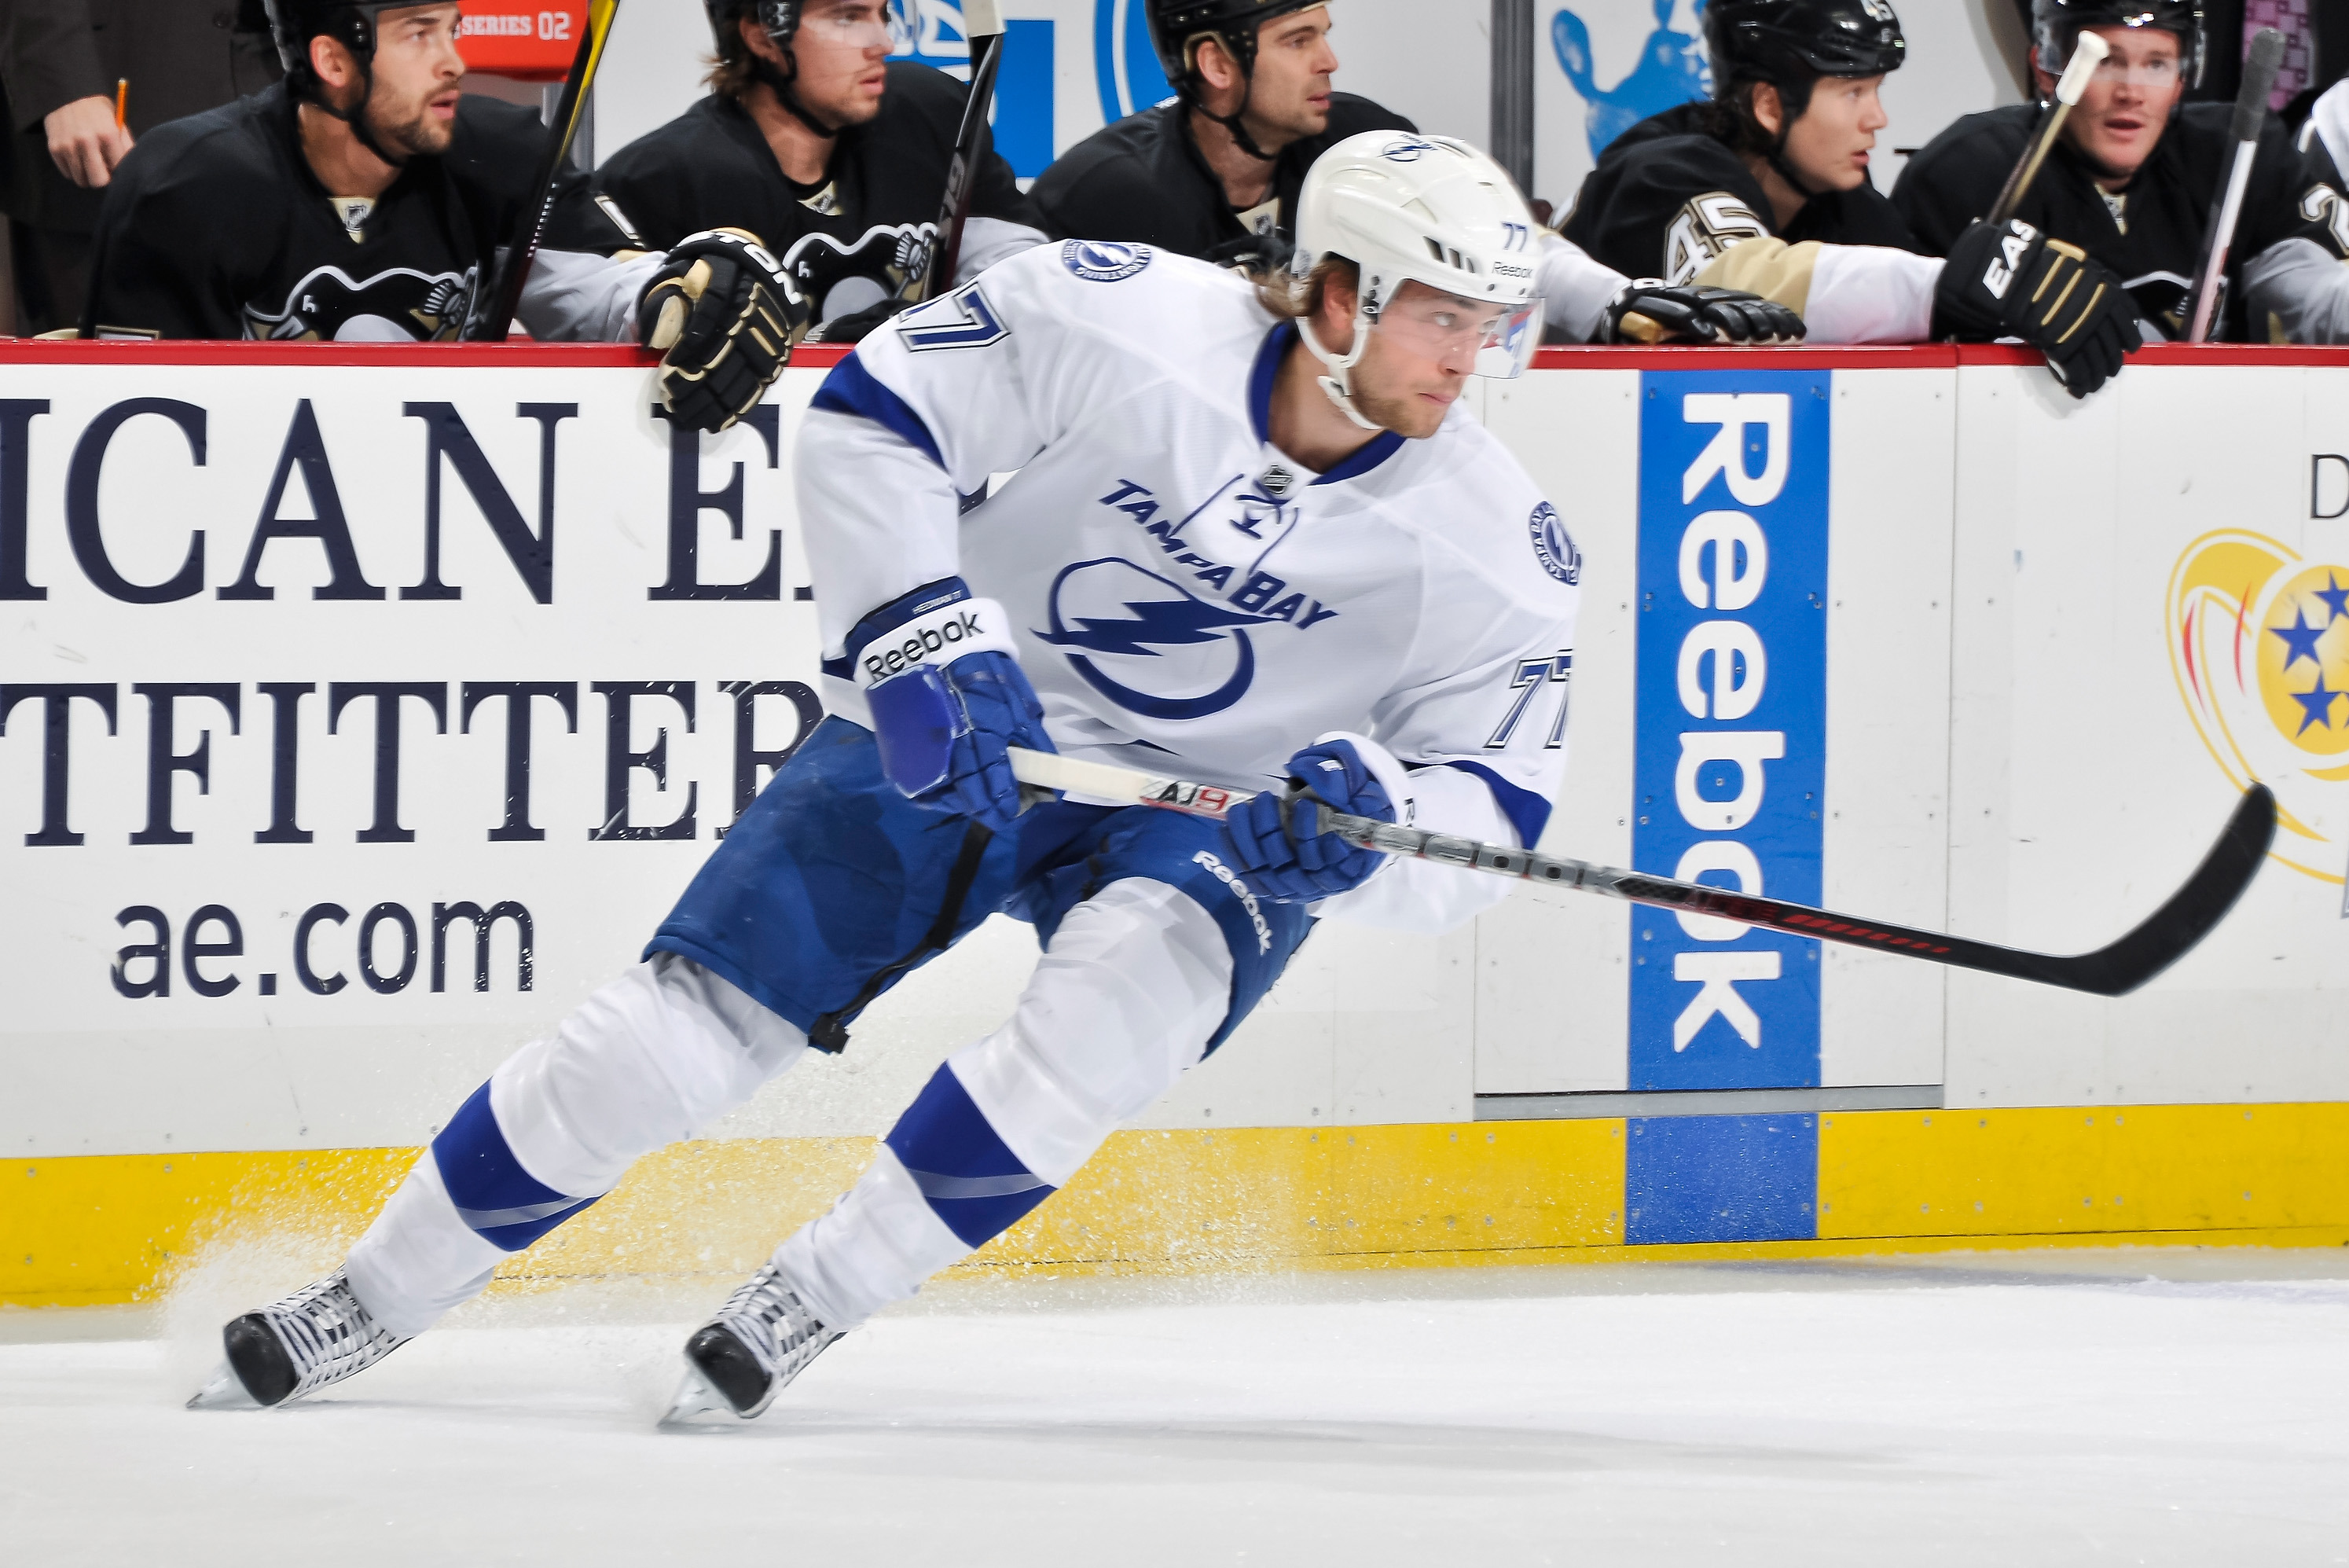 Humane Society of Tampa Bay - Congratulations Victor Hedman! Victor is the  first Lightning defenseman to reach 100 career goals! We are so proud of  you! Thank you Victor and Sanna Hedman